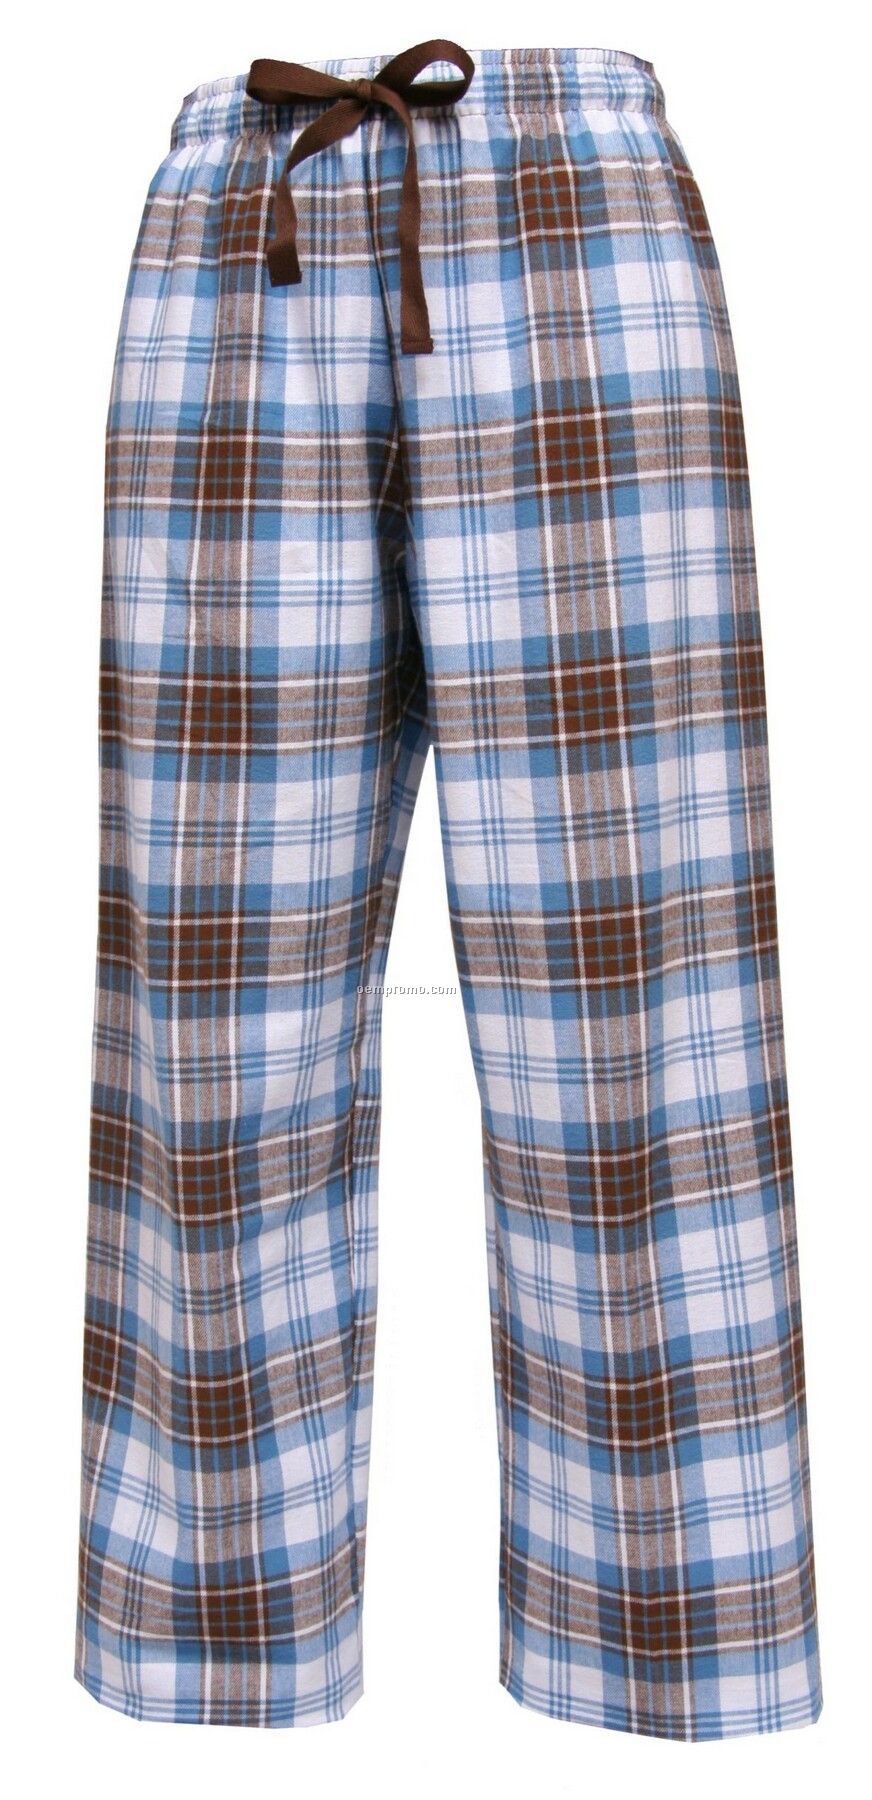 Adult Brown/Baby Blue Plaid Fashion Flannel Pant With Tie Cord